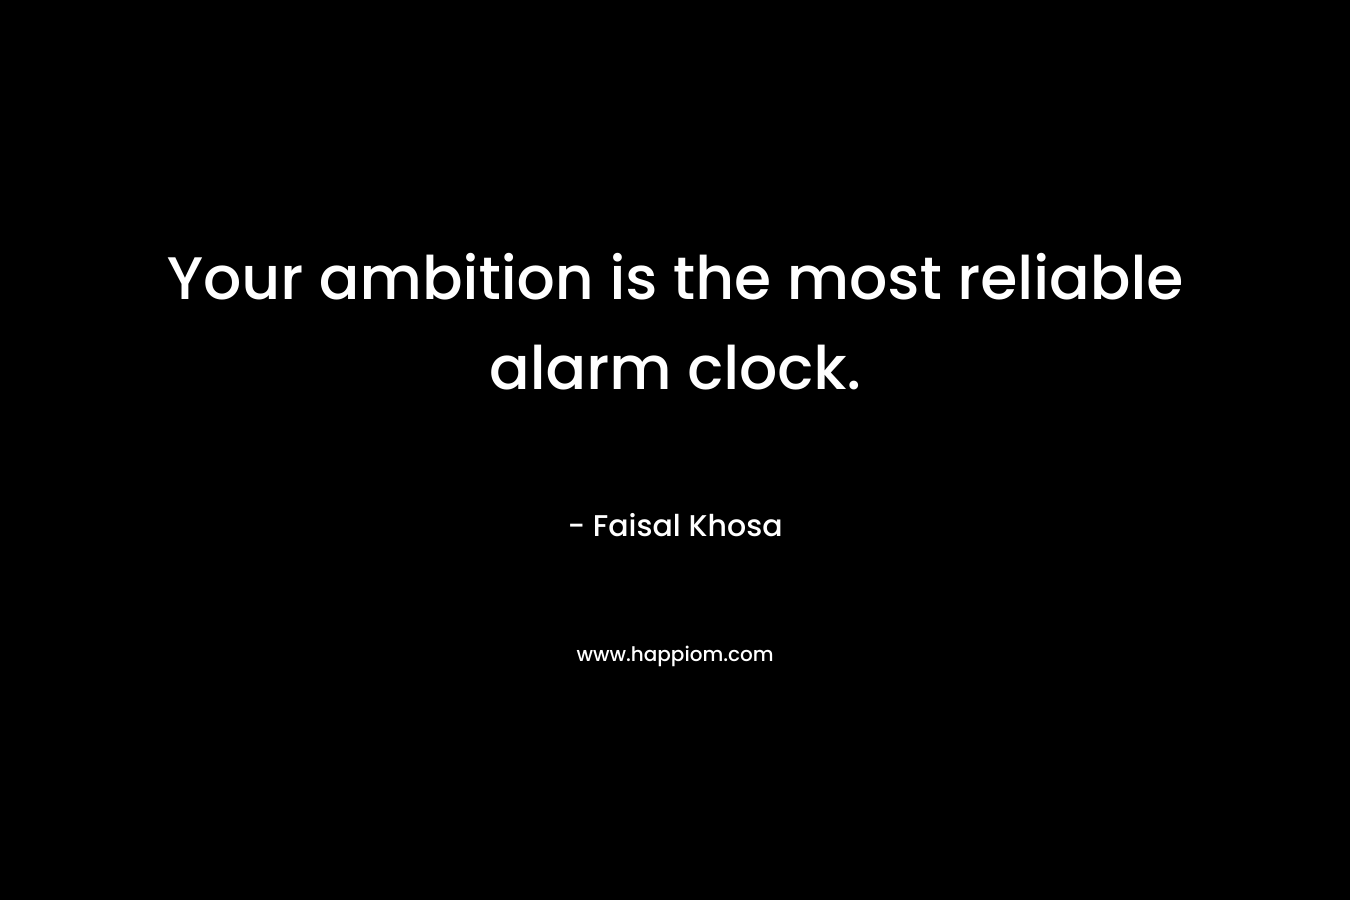 Your ambition is the most reliable alarm clock. – Faisal Khosa